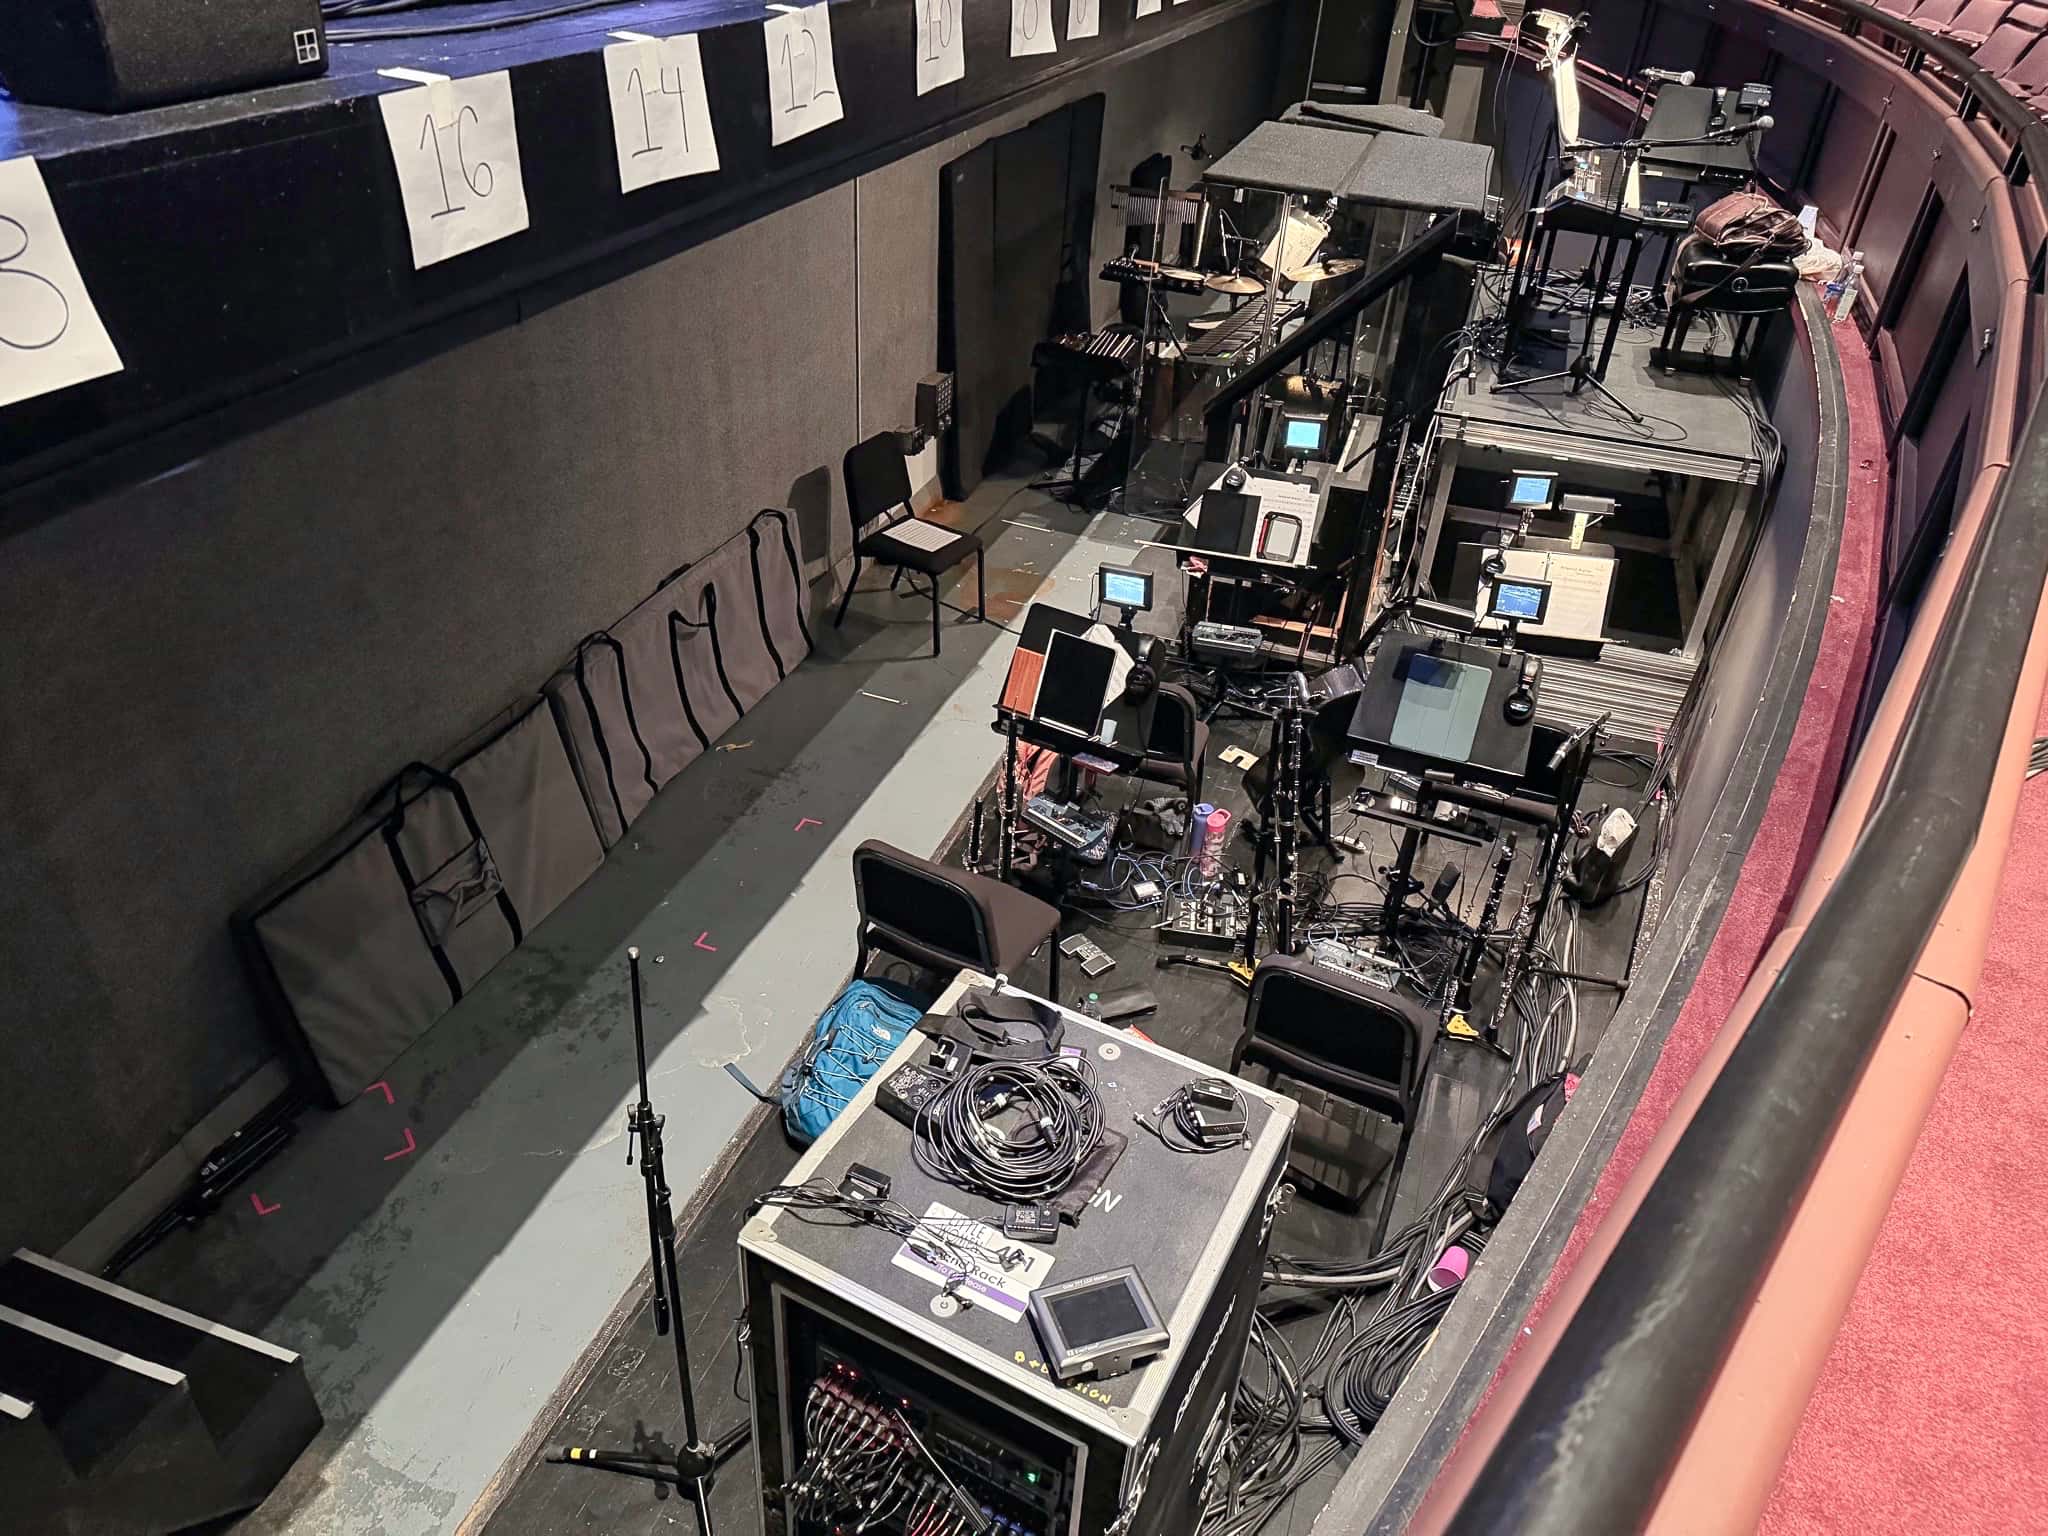 Sal Mazzotta's setup for the National Tour of Little Women at the RiverPark Center in Owensboro, Kentucky.